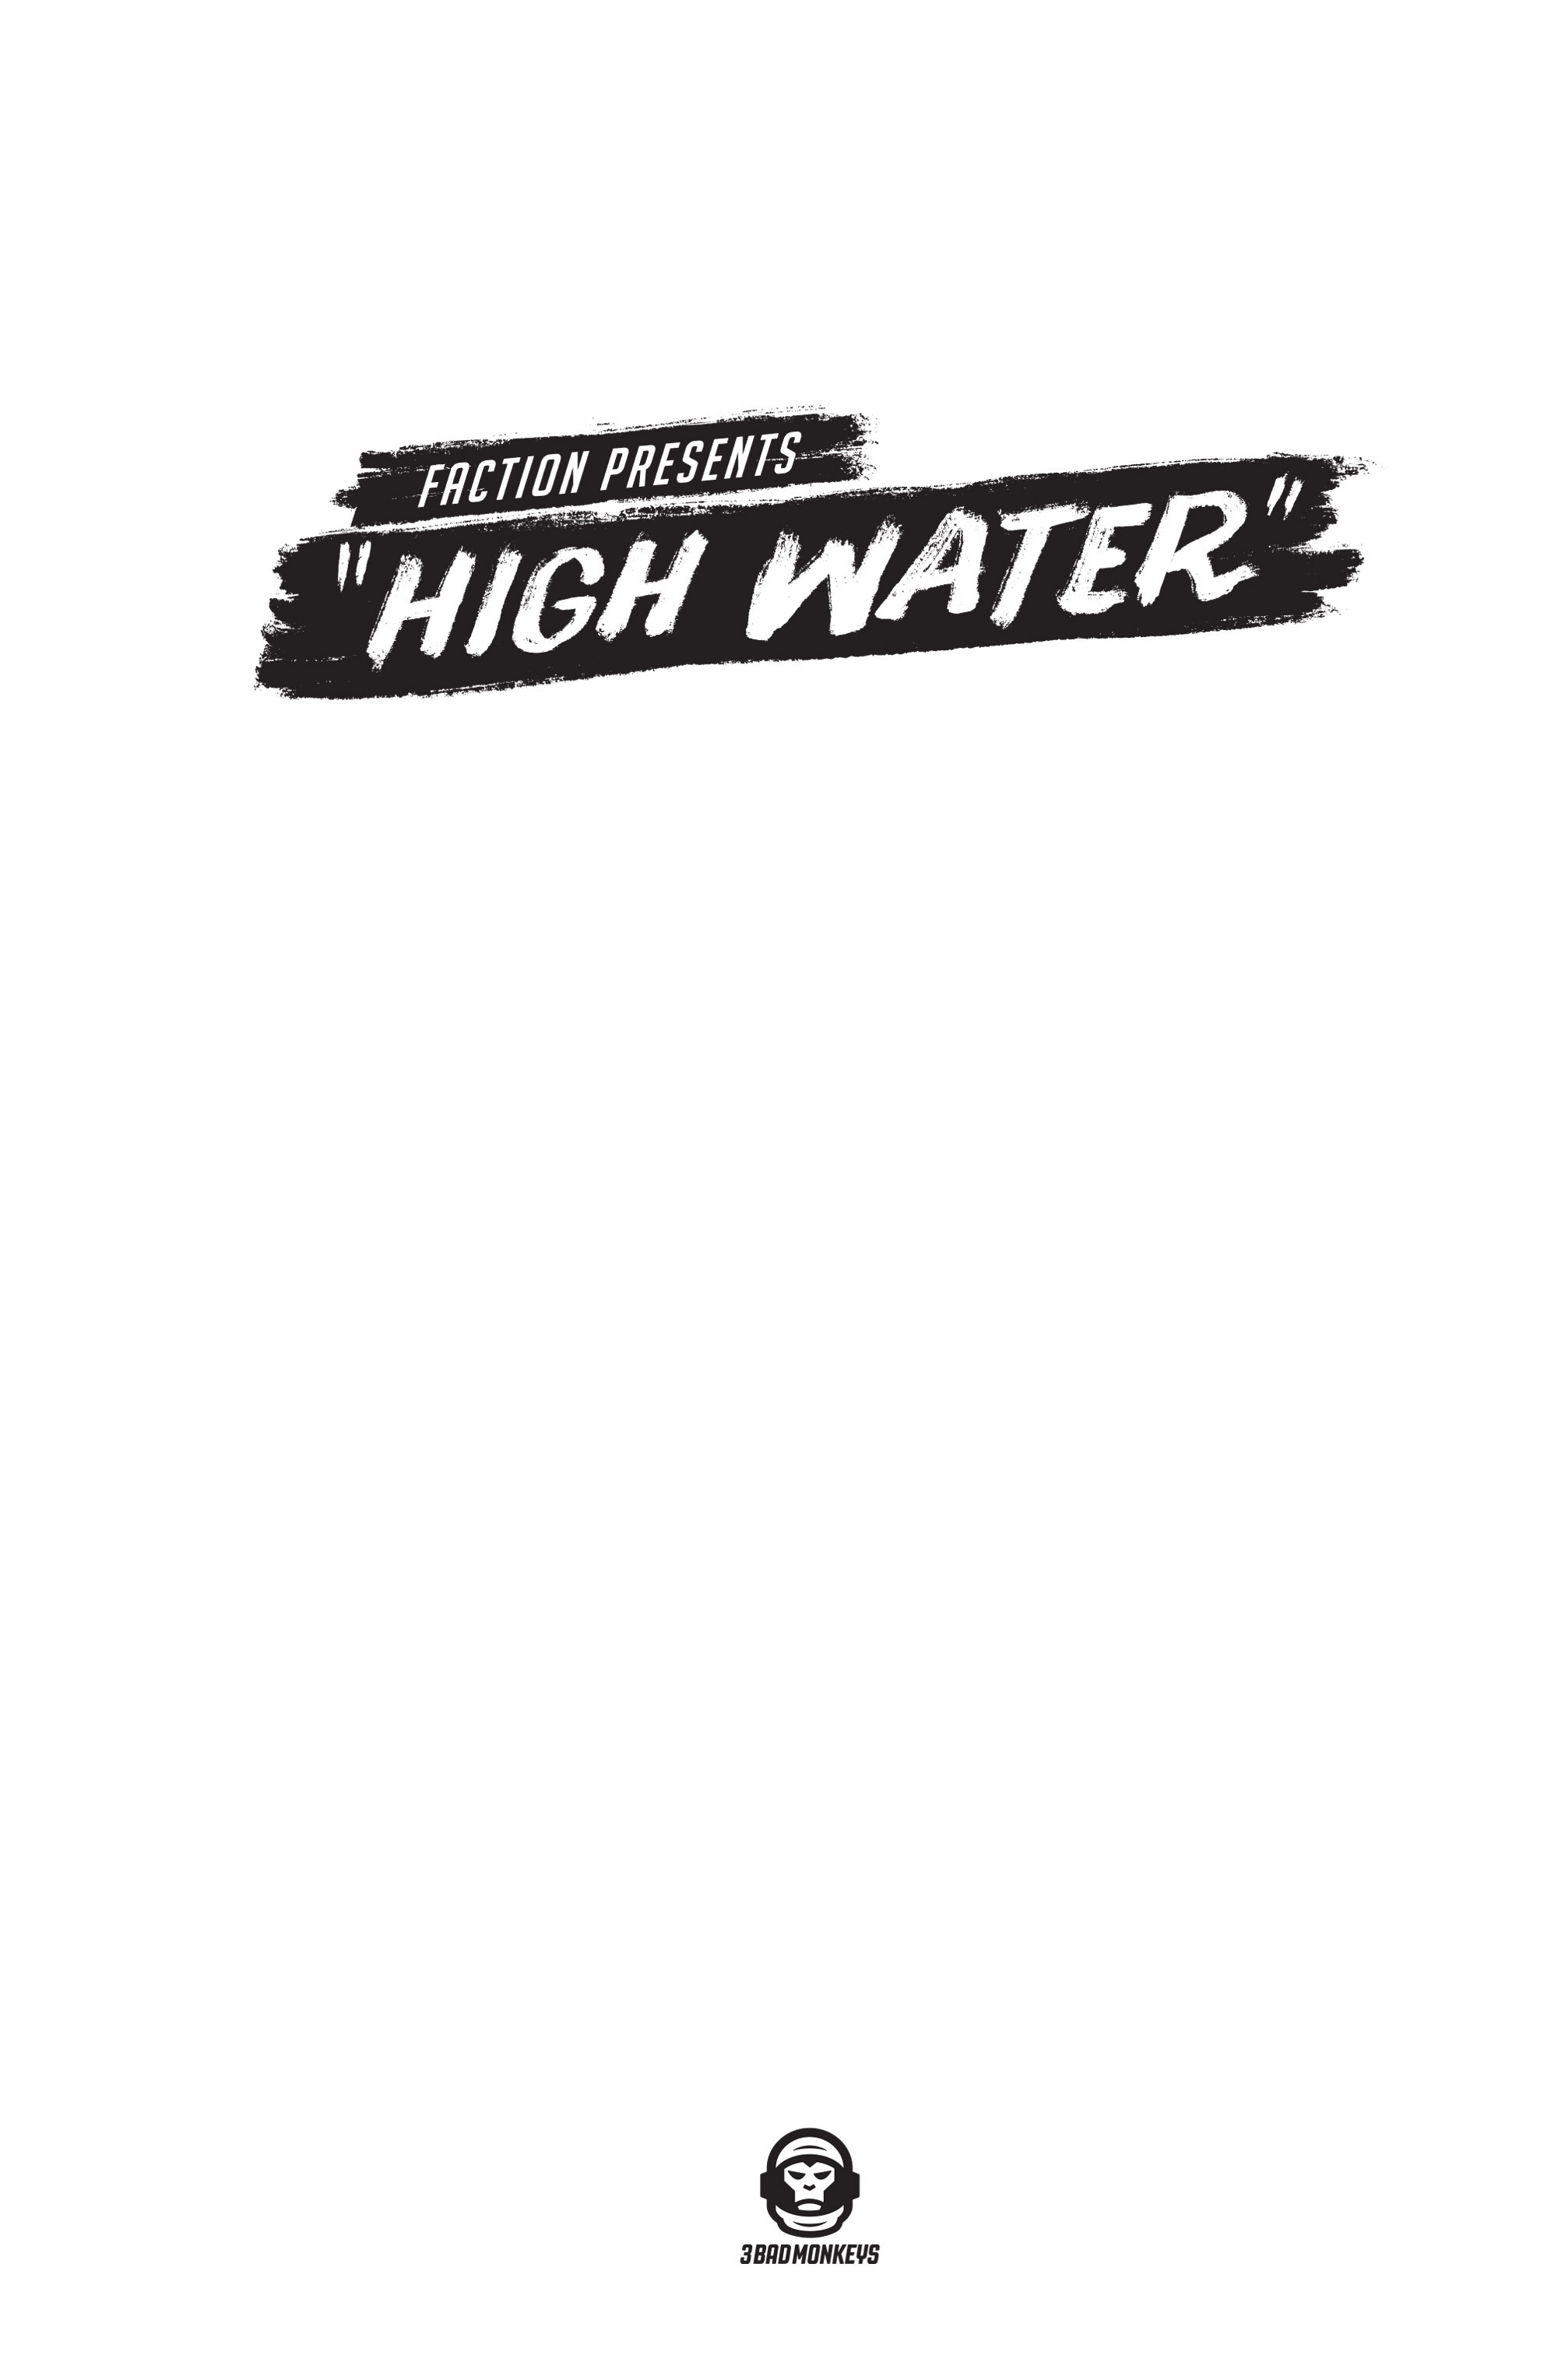 Read online Faction Presents: High Water comic -  Issue # TPB - 3